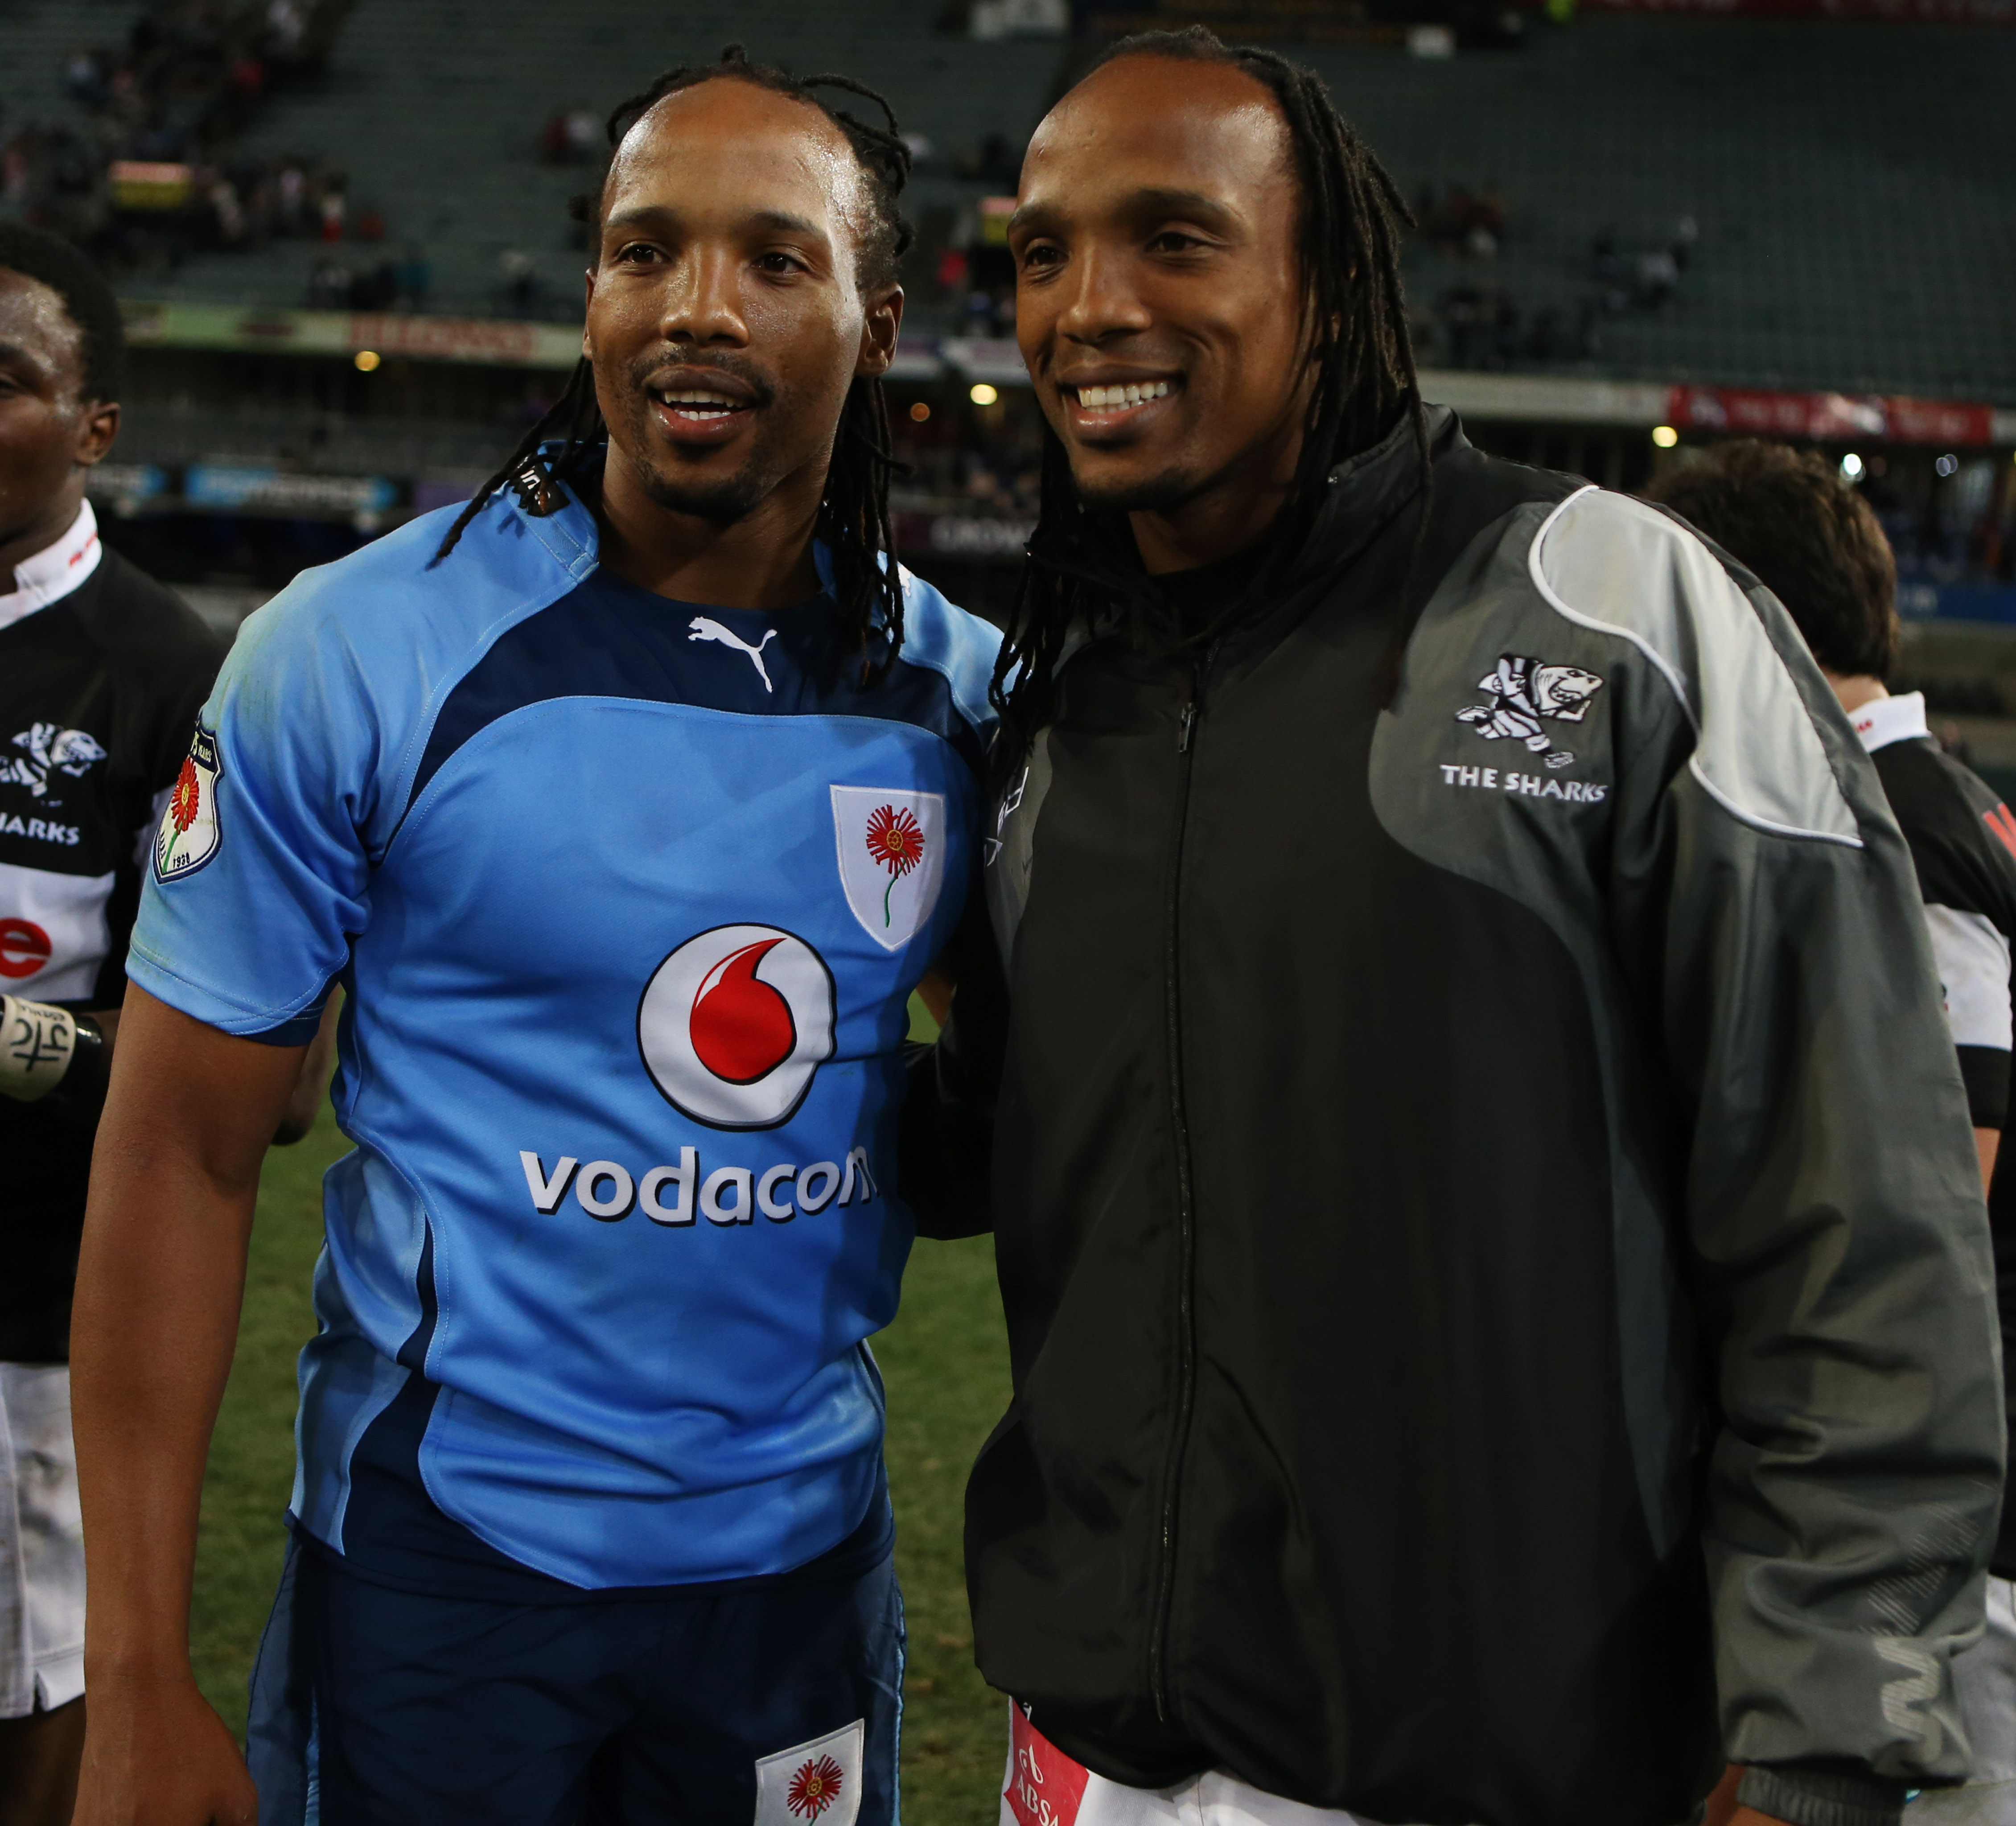 DURBAN, SOUTH AFRICA - AUGUST 31: Akona Ndungane with Odwa Ndunganeu of the Sharks during the Absa Currie Cup match between The Sharks and Vodacom Blue Bulls at Growthpoint Kings Park on August 31, 2013 in Durban, South Africa. (Photo by Steve Haag/Gallo Images)